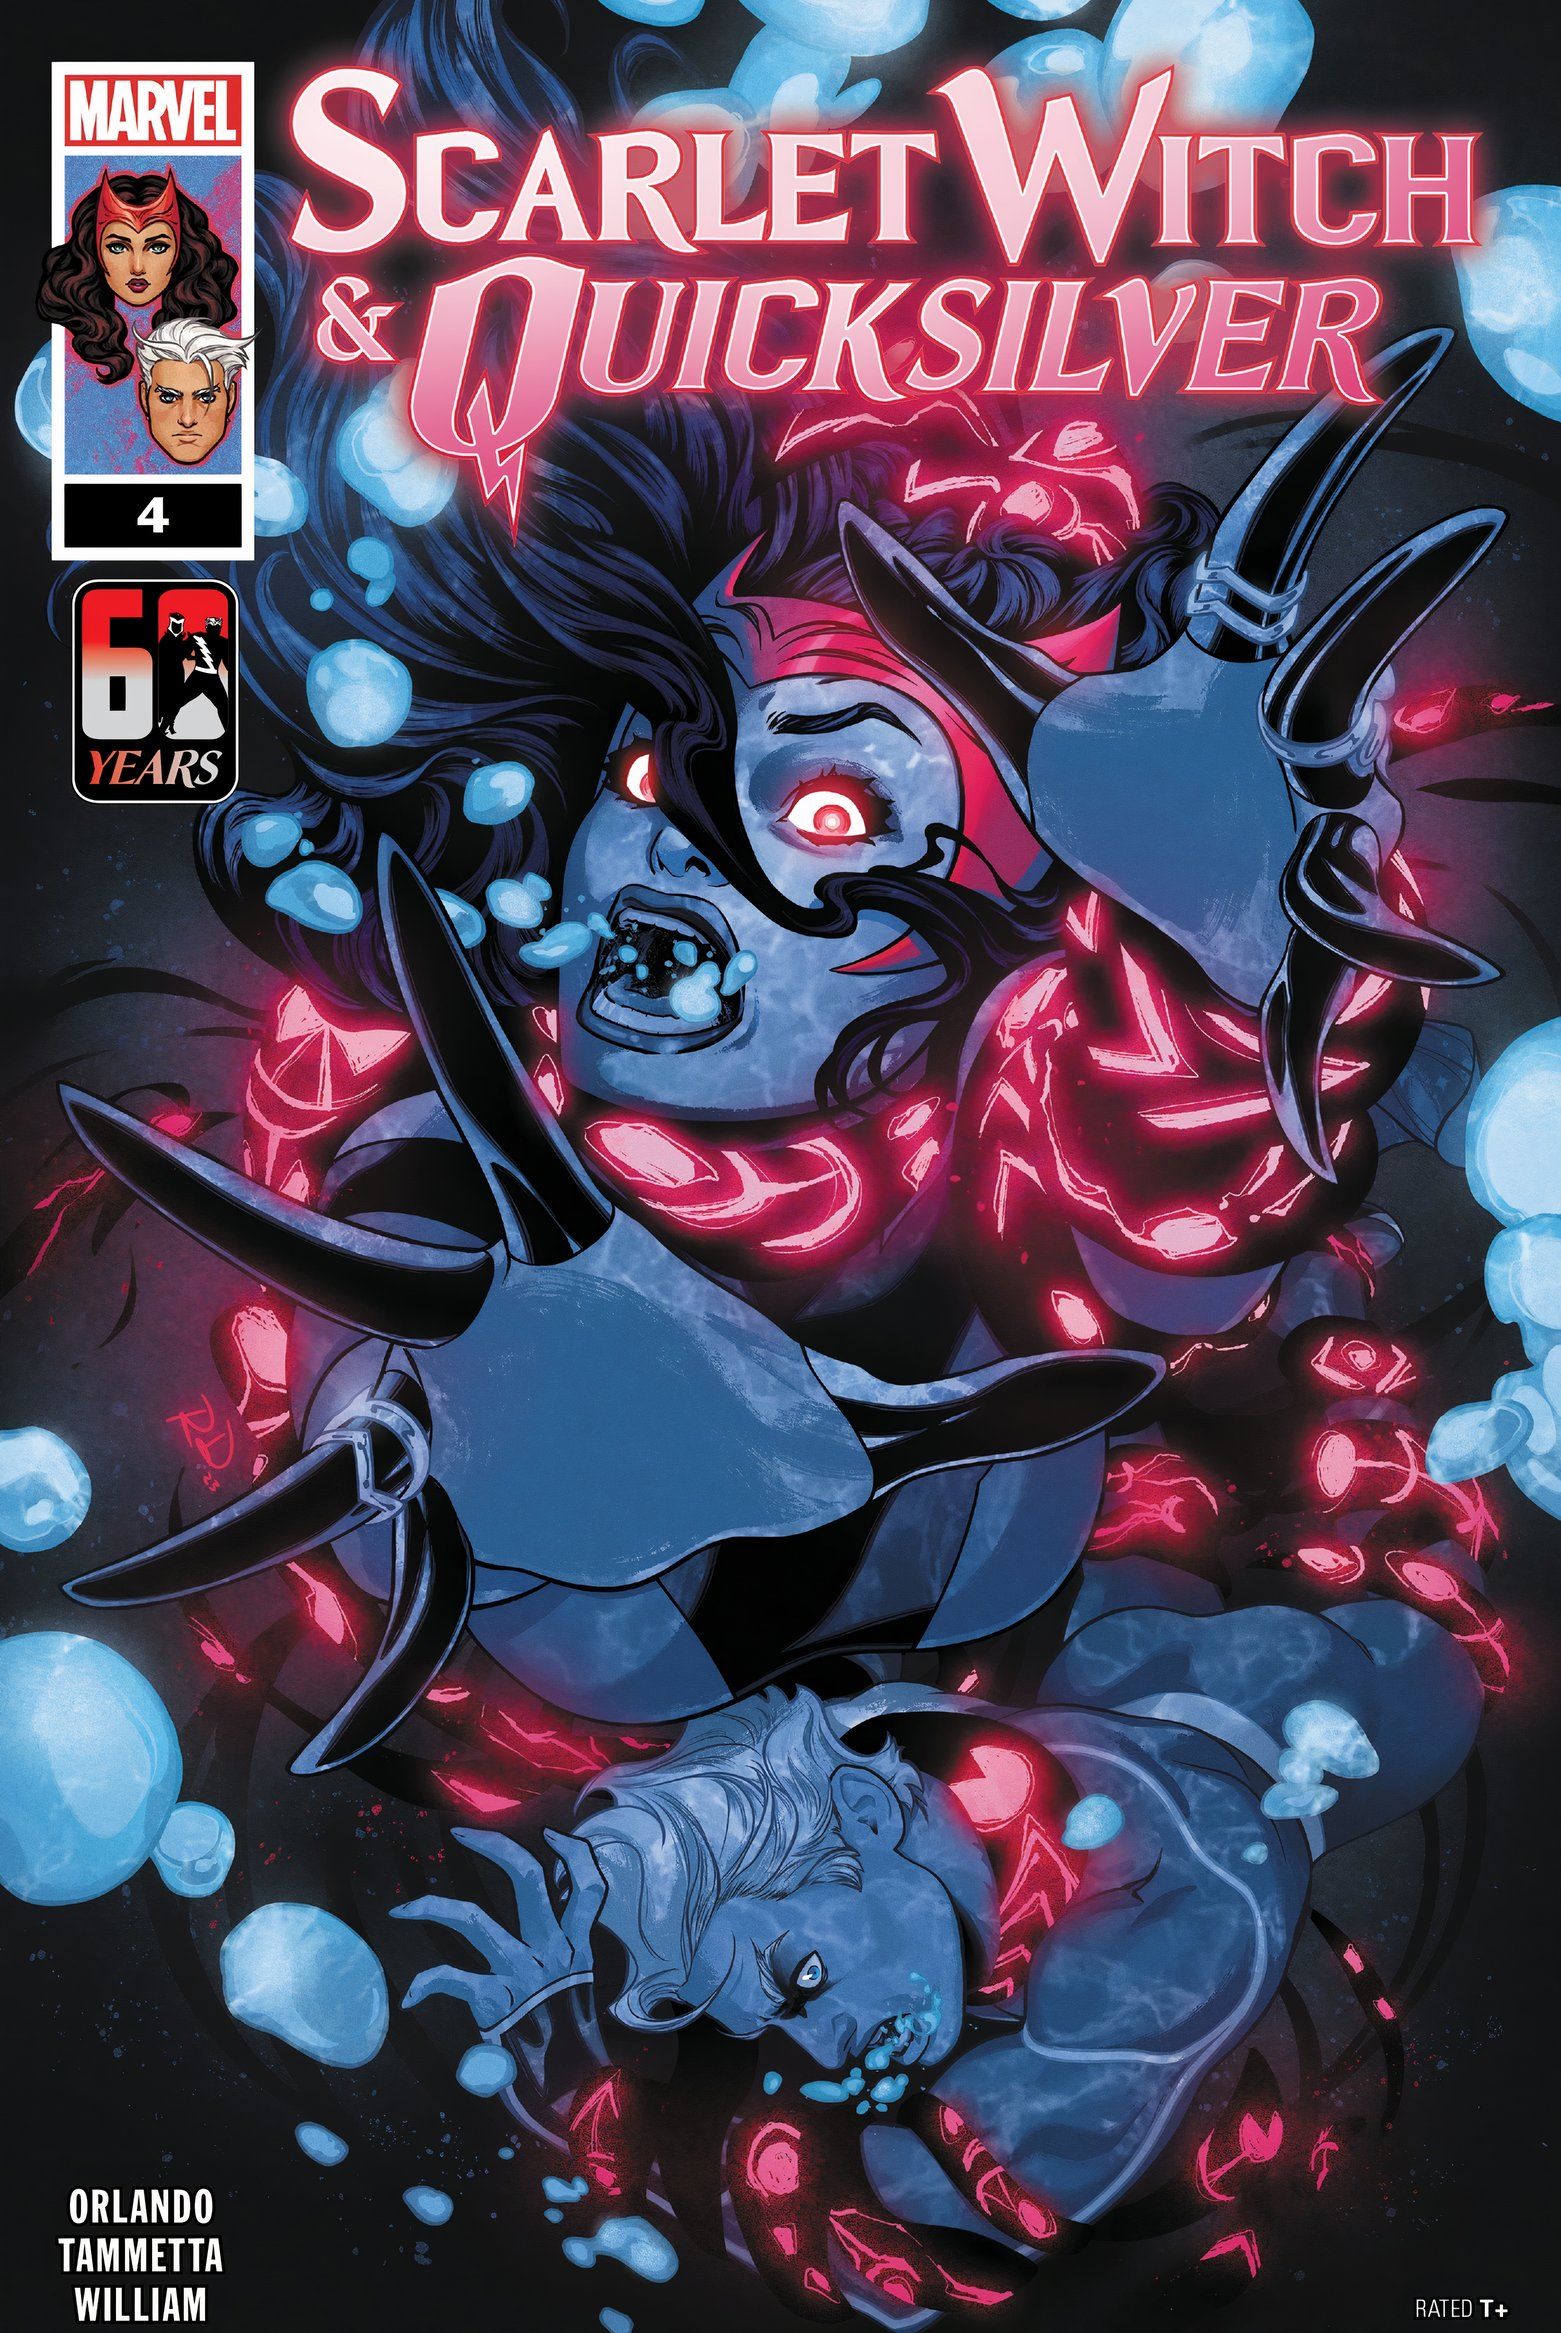 Scarlet Witch & Quicksilver #4 cover, Scarlet Witch and Quicksilver are held down by red eldritch energy. 